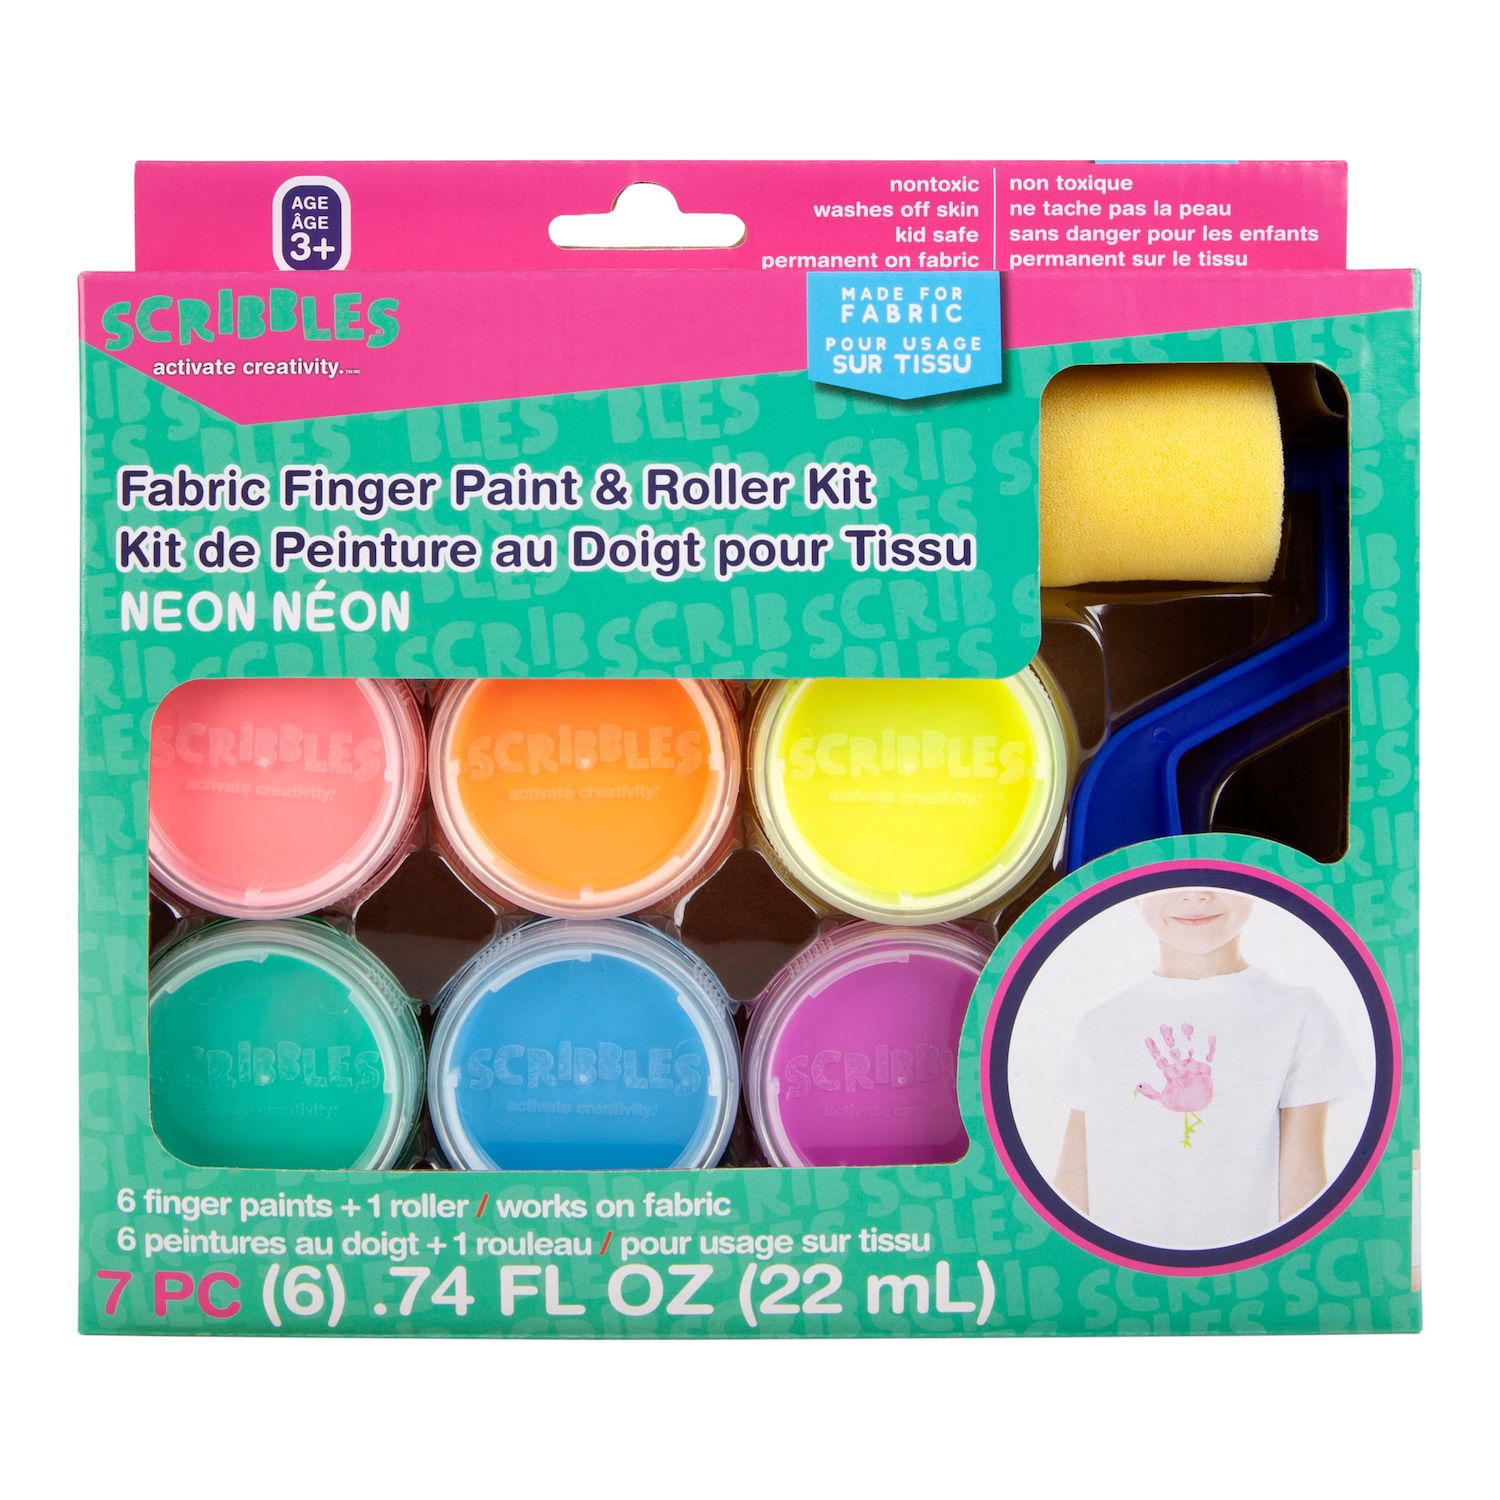 Liquid Chalk Markers - Fine Tip Chalk Pens for Multiple Surfaces